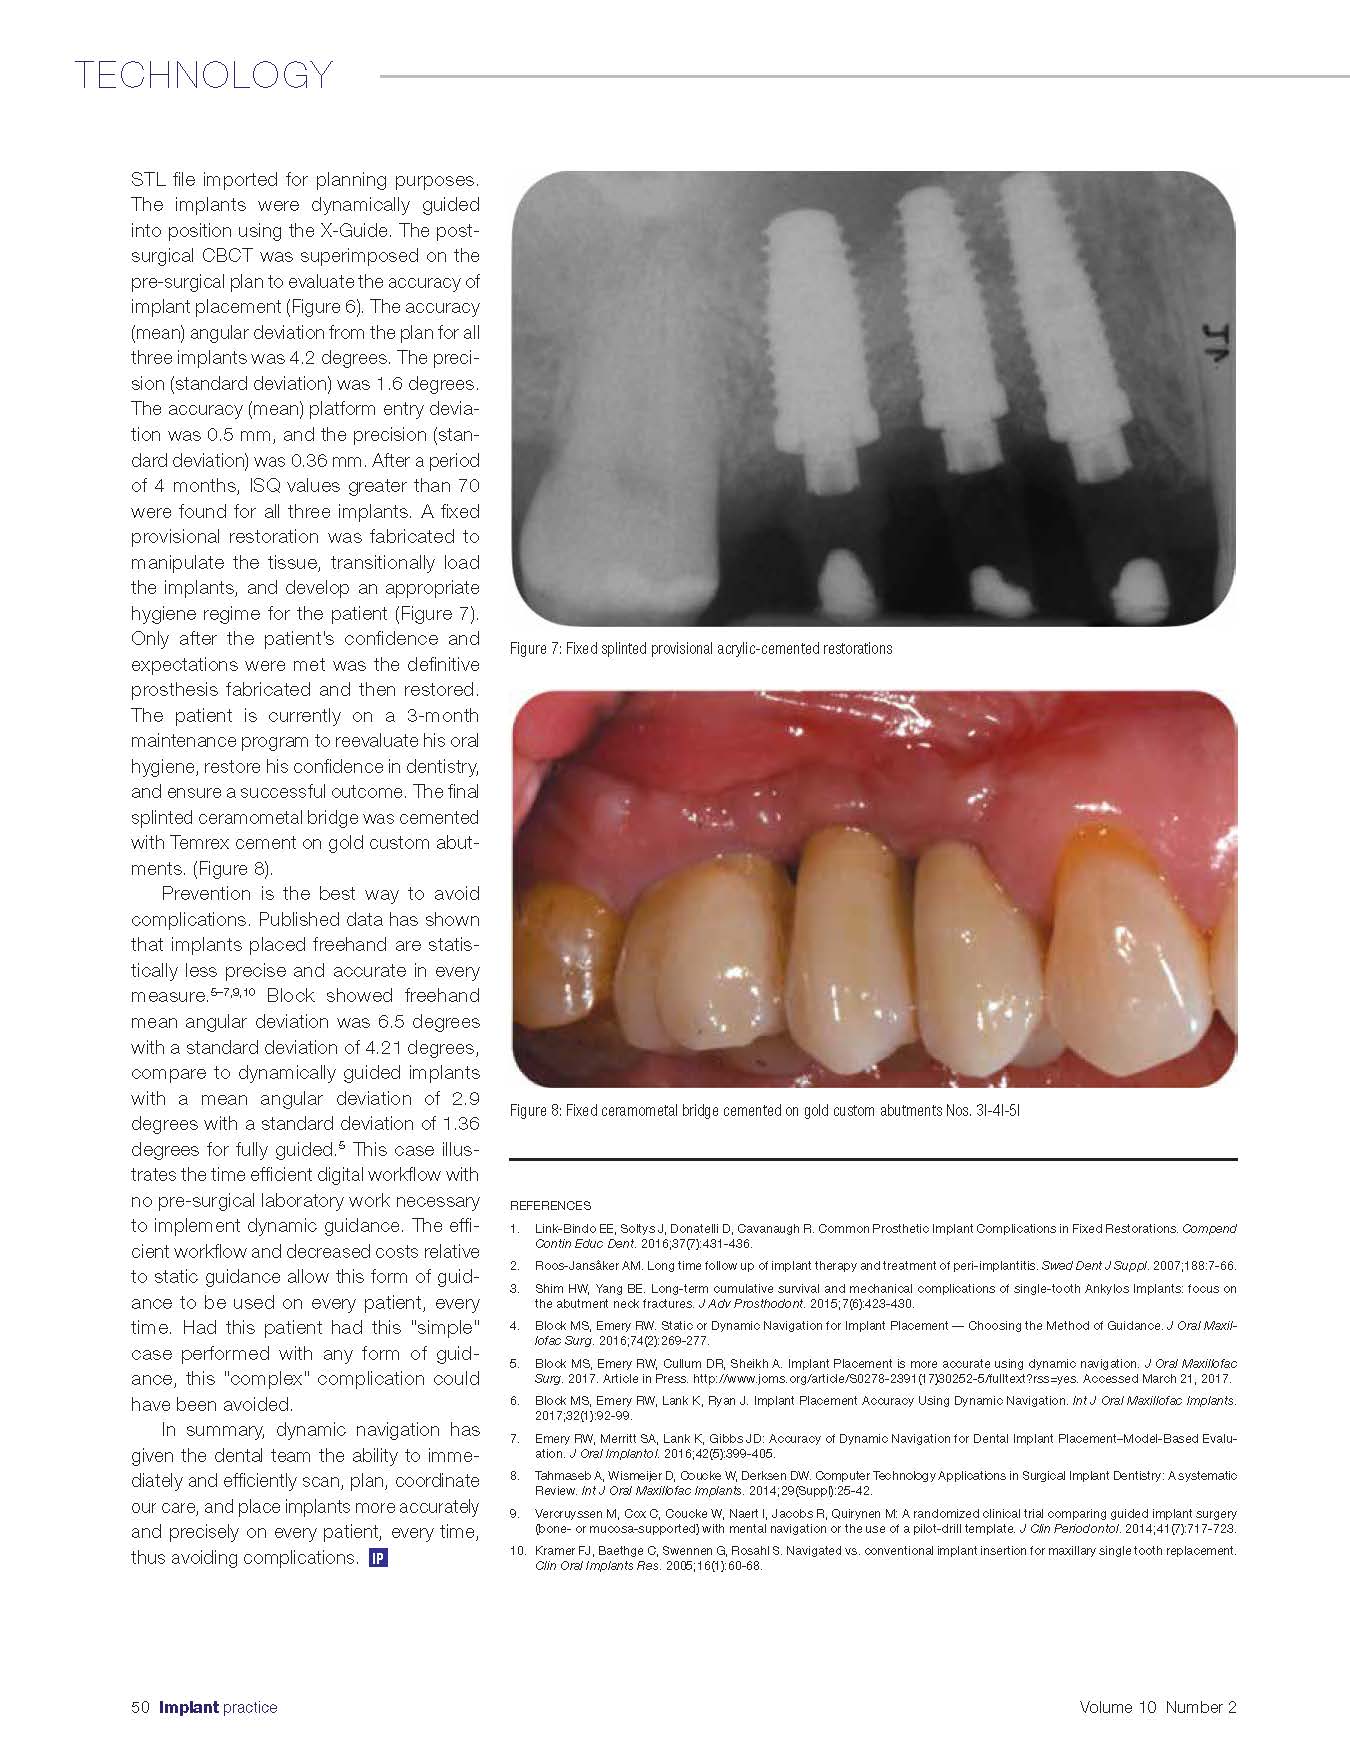 Navigation-To-Prevent-Implant-ComplicationsIPUSQ217_Page_3.jpg